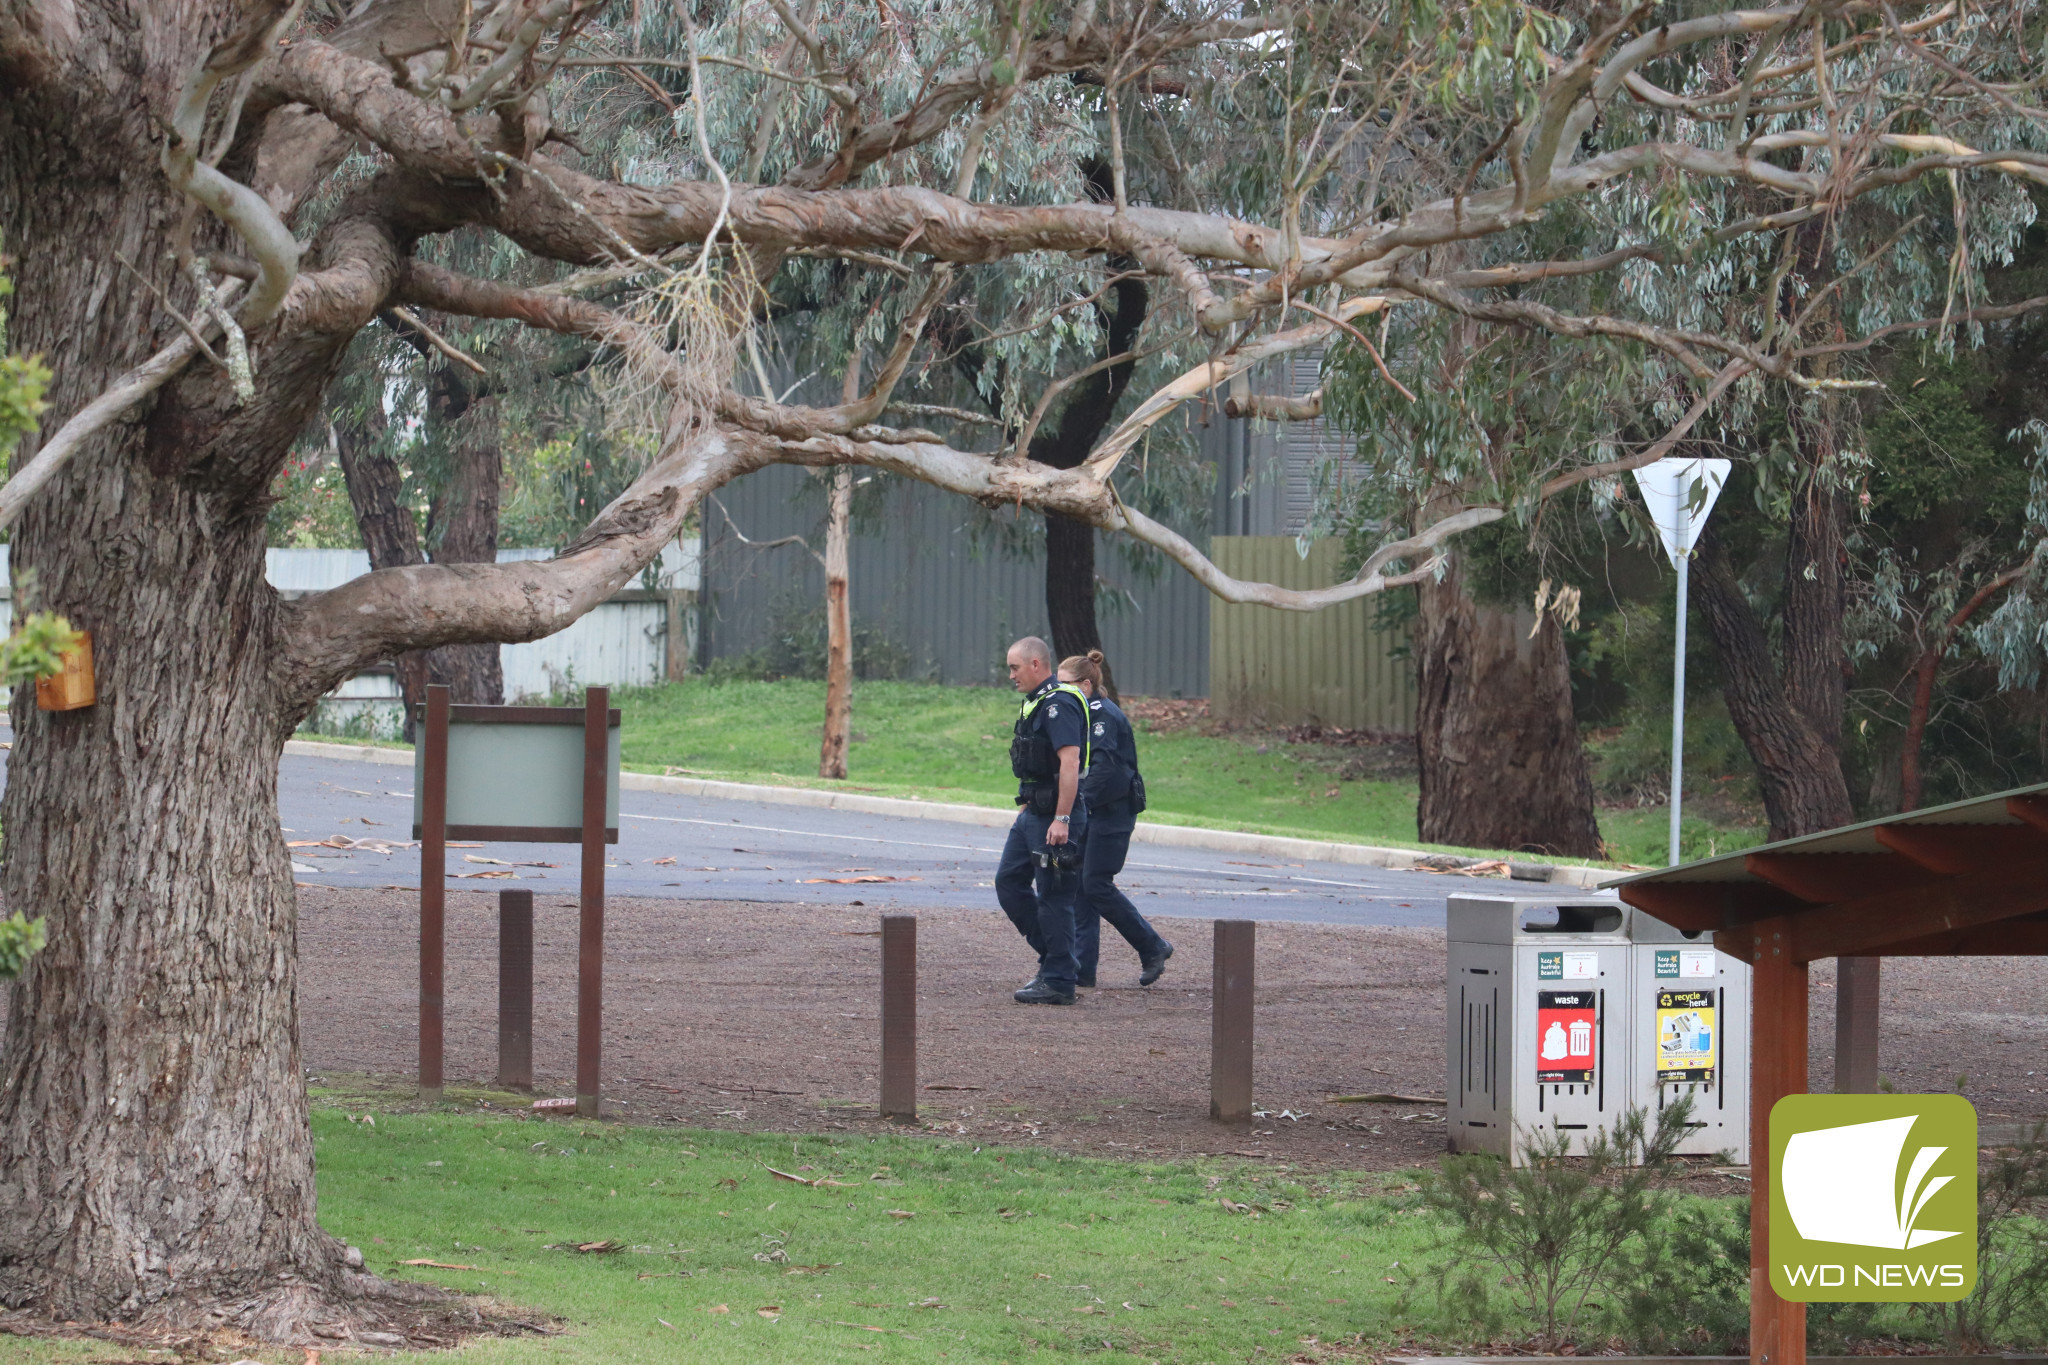 Police cordoned off a section of Cobden, with Air Wing also called in to locate an alleged offender after a shooting.